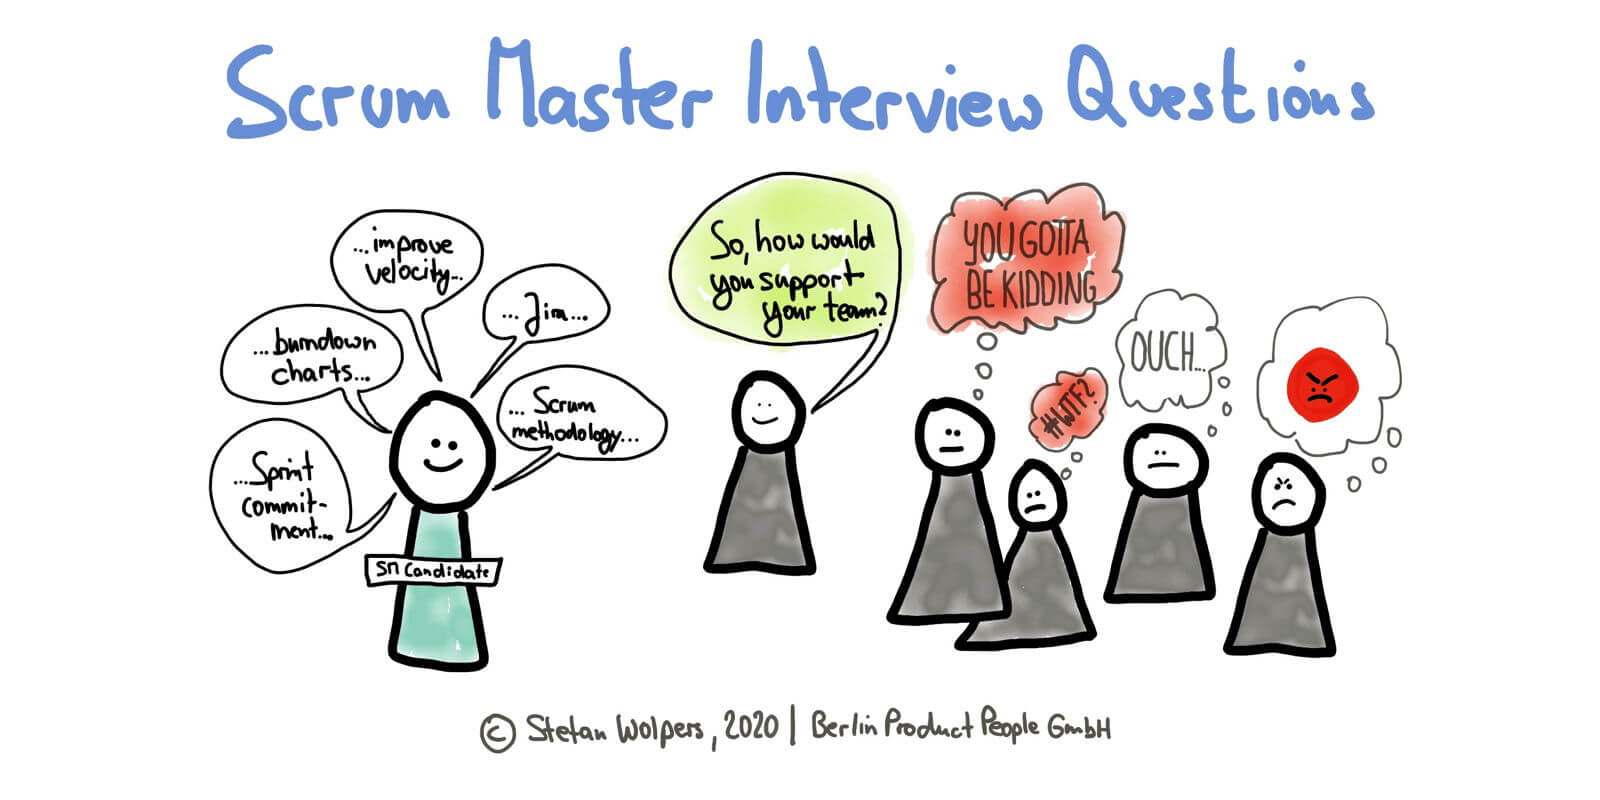 Scrum Master Interview Questions 47 Scrum Master Interview Questions to Identify Suitable Candidates — Berlin Product People GmbH